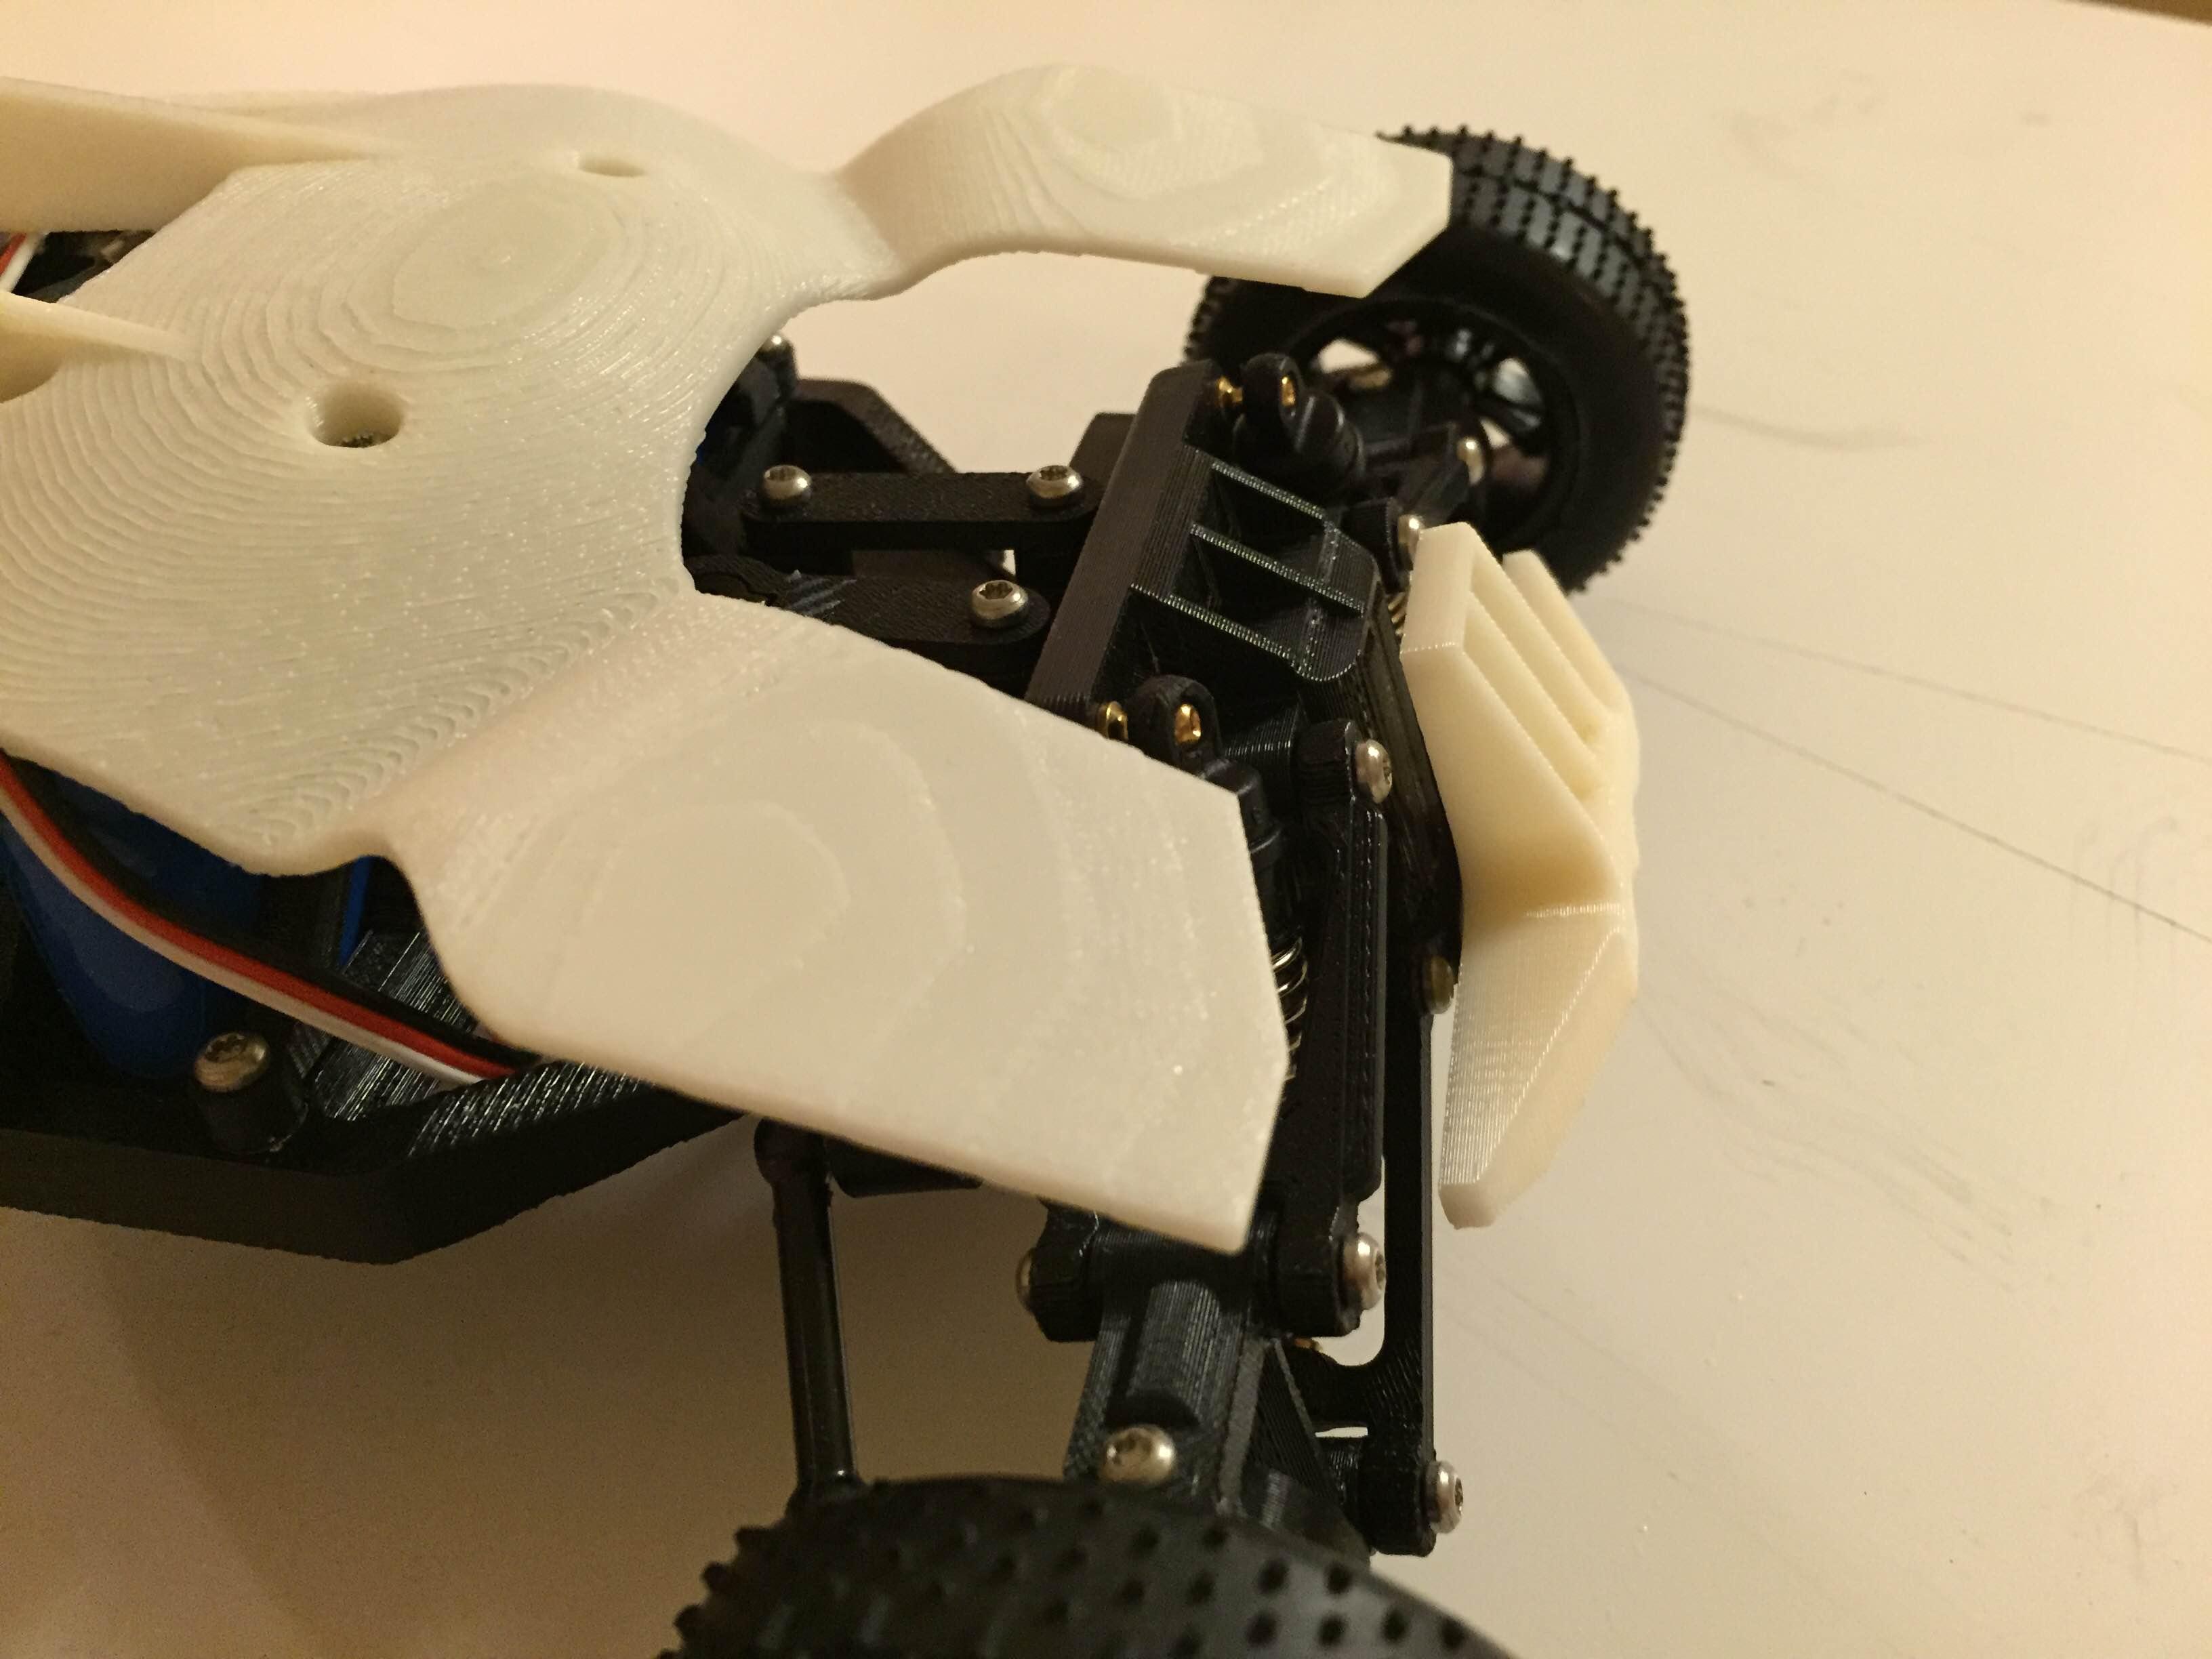 Off-Road or In Class 3D Printed RC Vehicle Gets Top Marks.